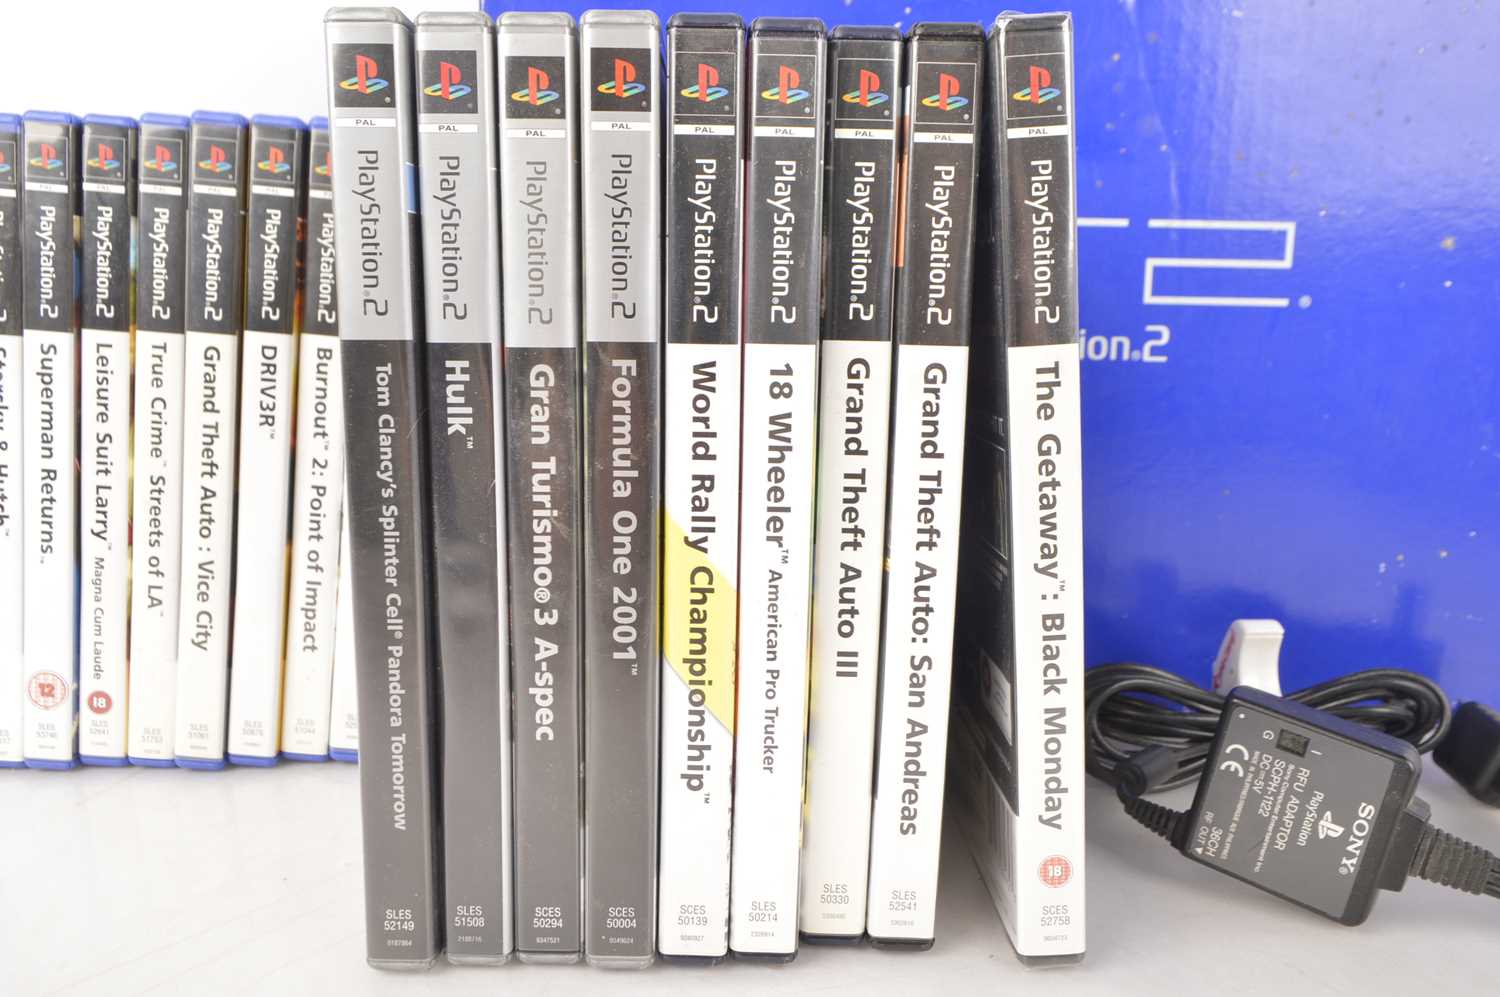 Sony PlayStation PS2 Games Consoles & Games, - Image 2 of 3